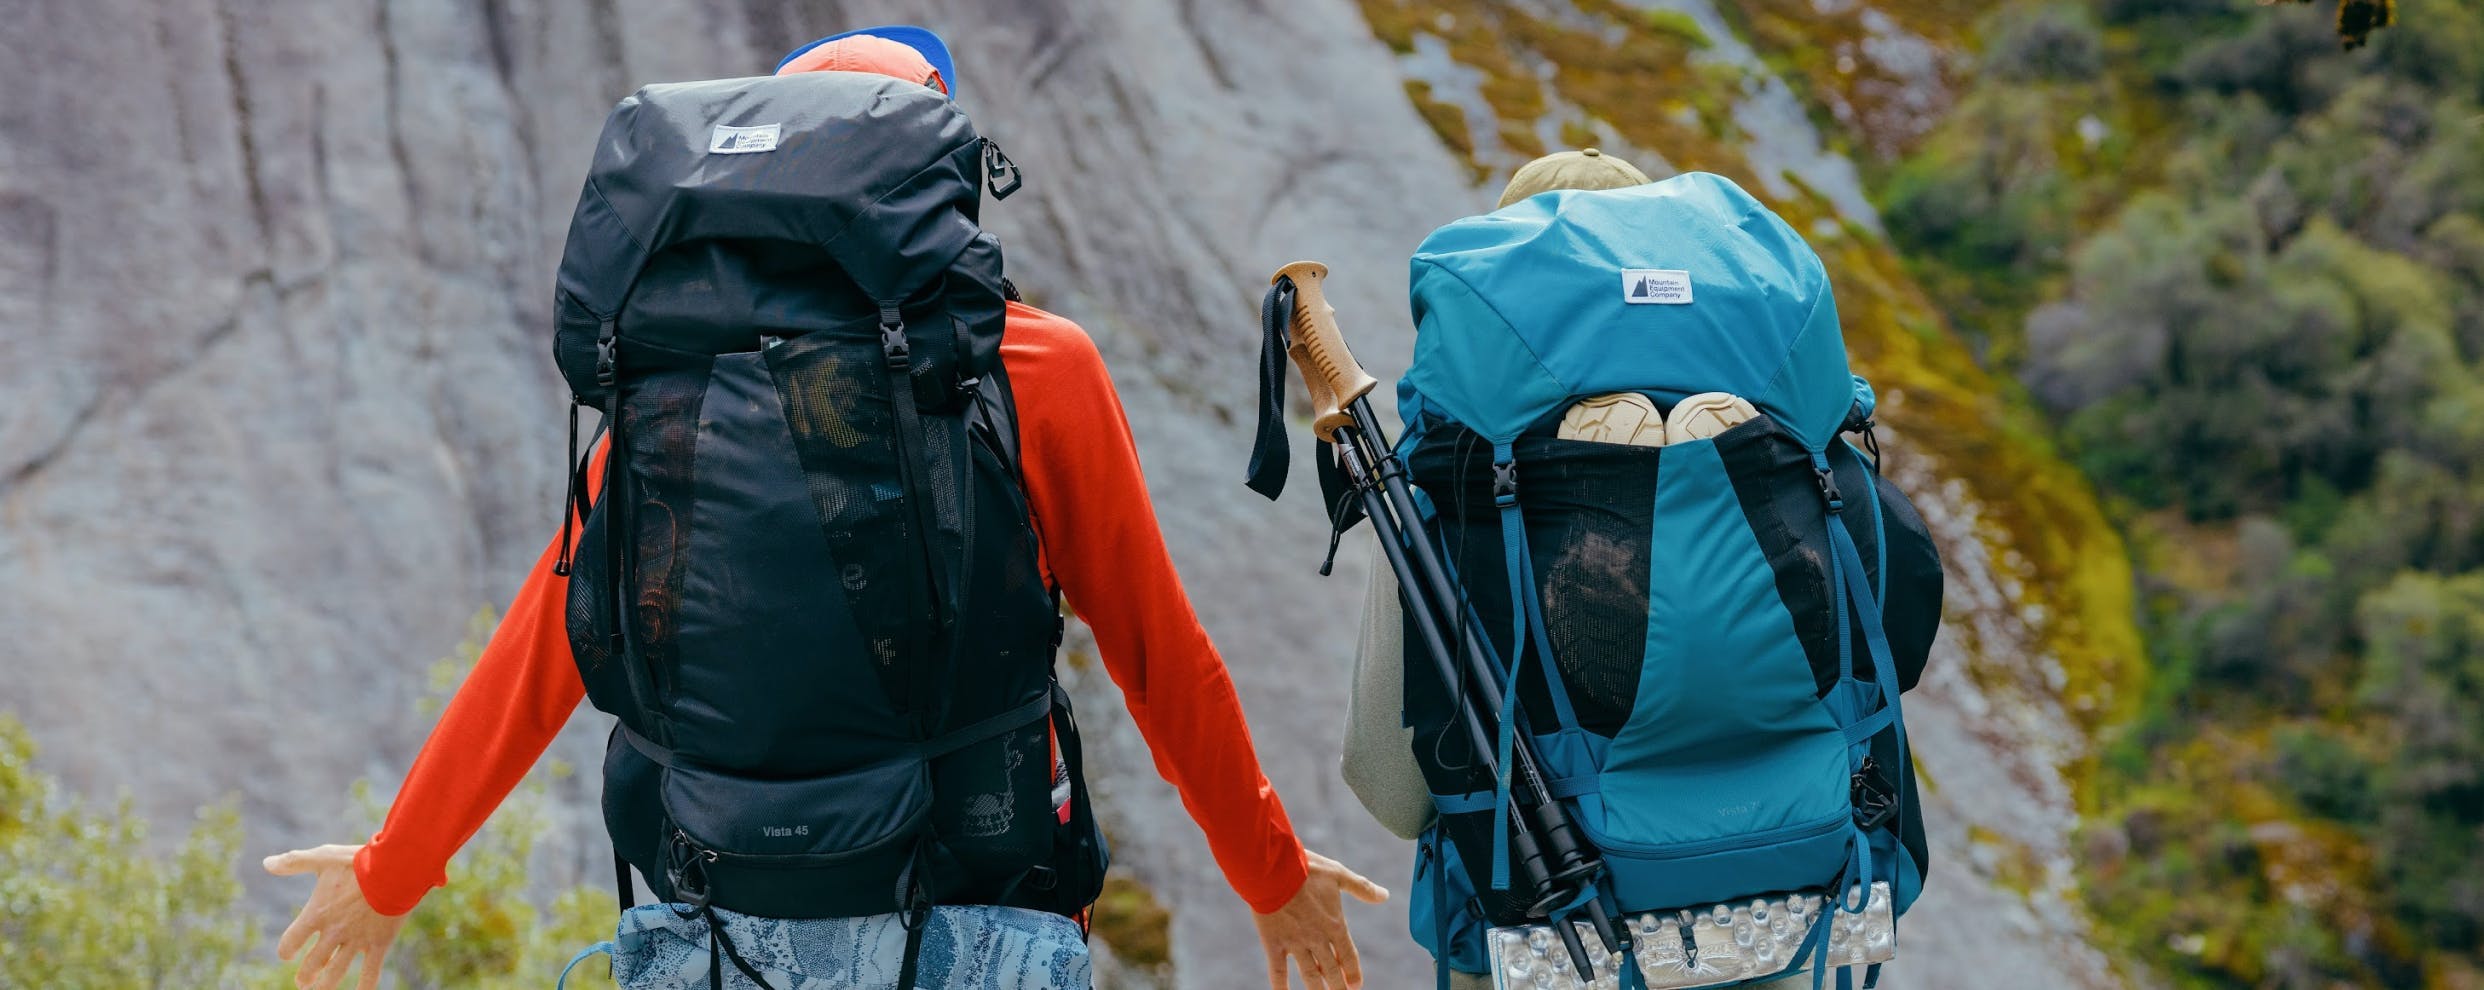 Backpacks, duffle bags, packing organizers and more for fall trips and missions.